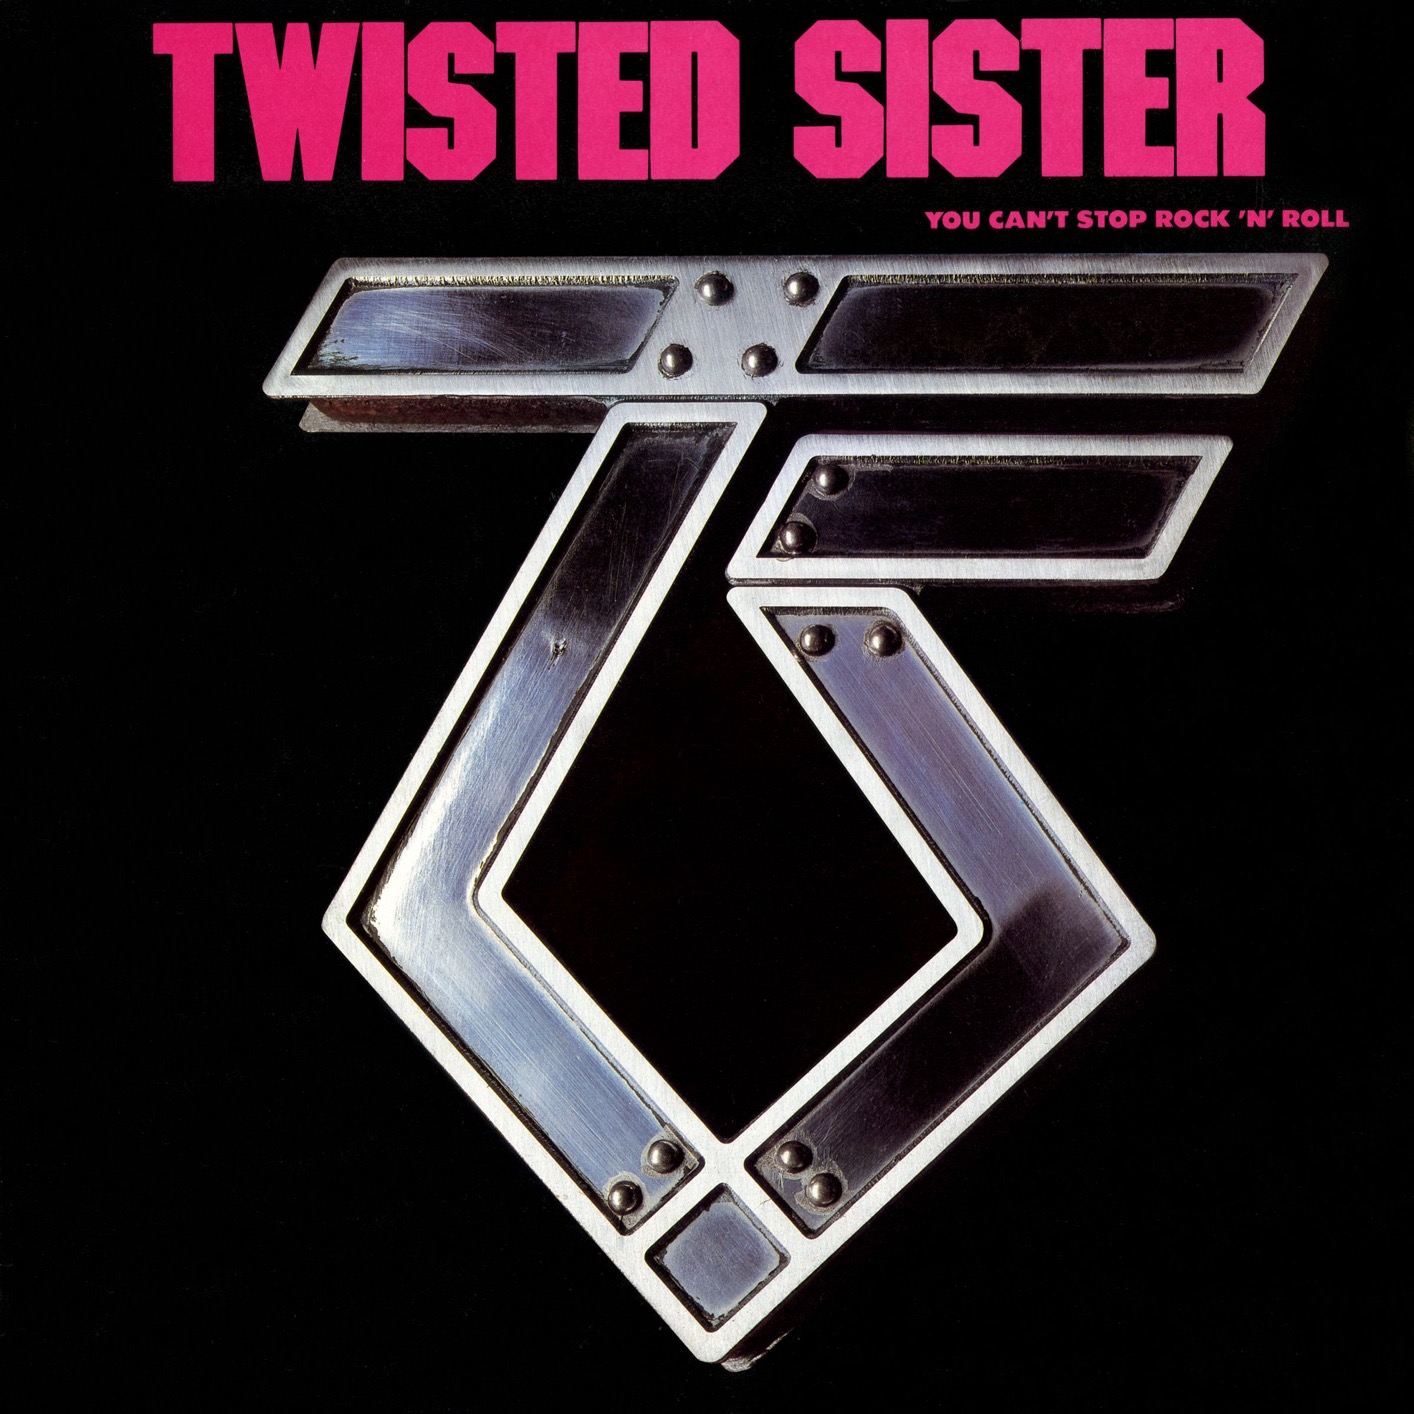 Twisted Sister – You Can’t Stop Rock ‘N’ Roll (1983/2017) [AcousticSounds FLAC 24bit/192kHz]